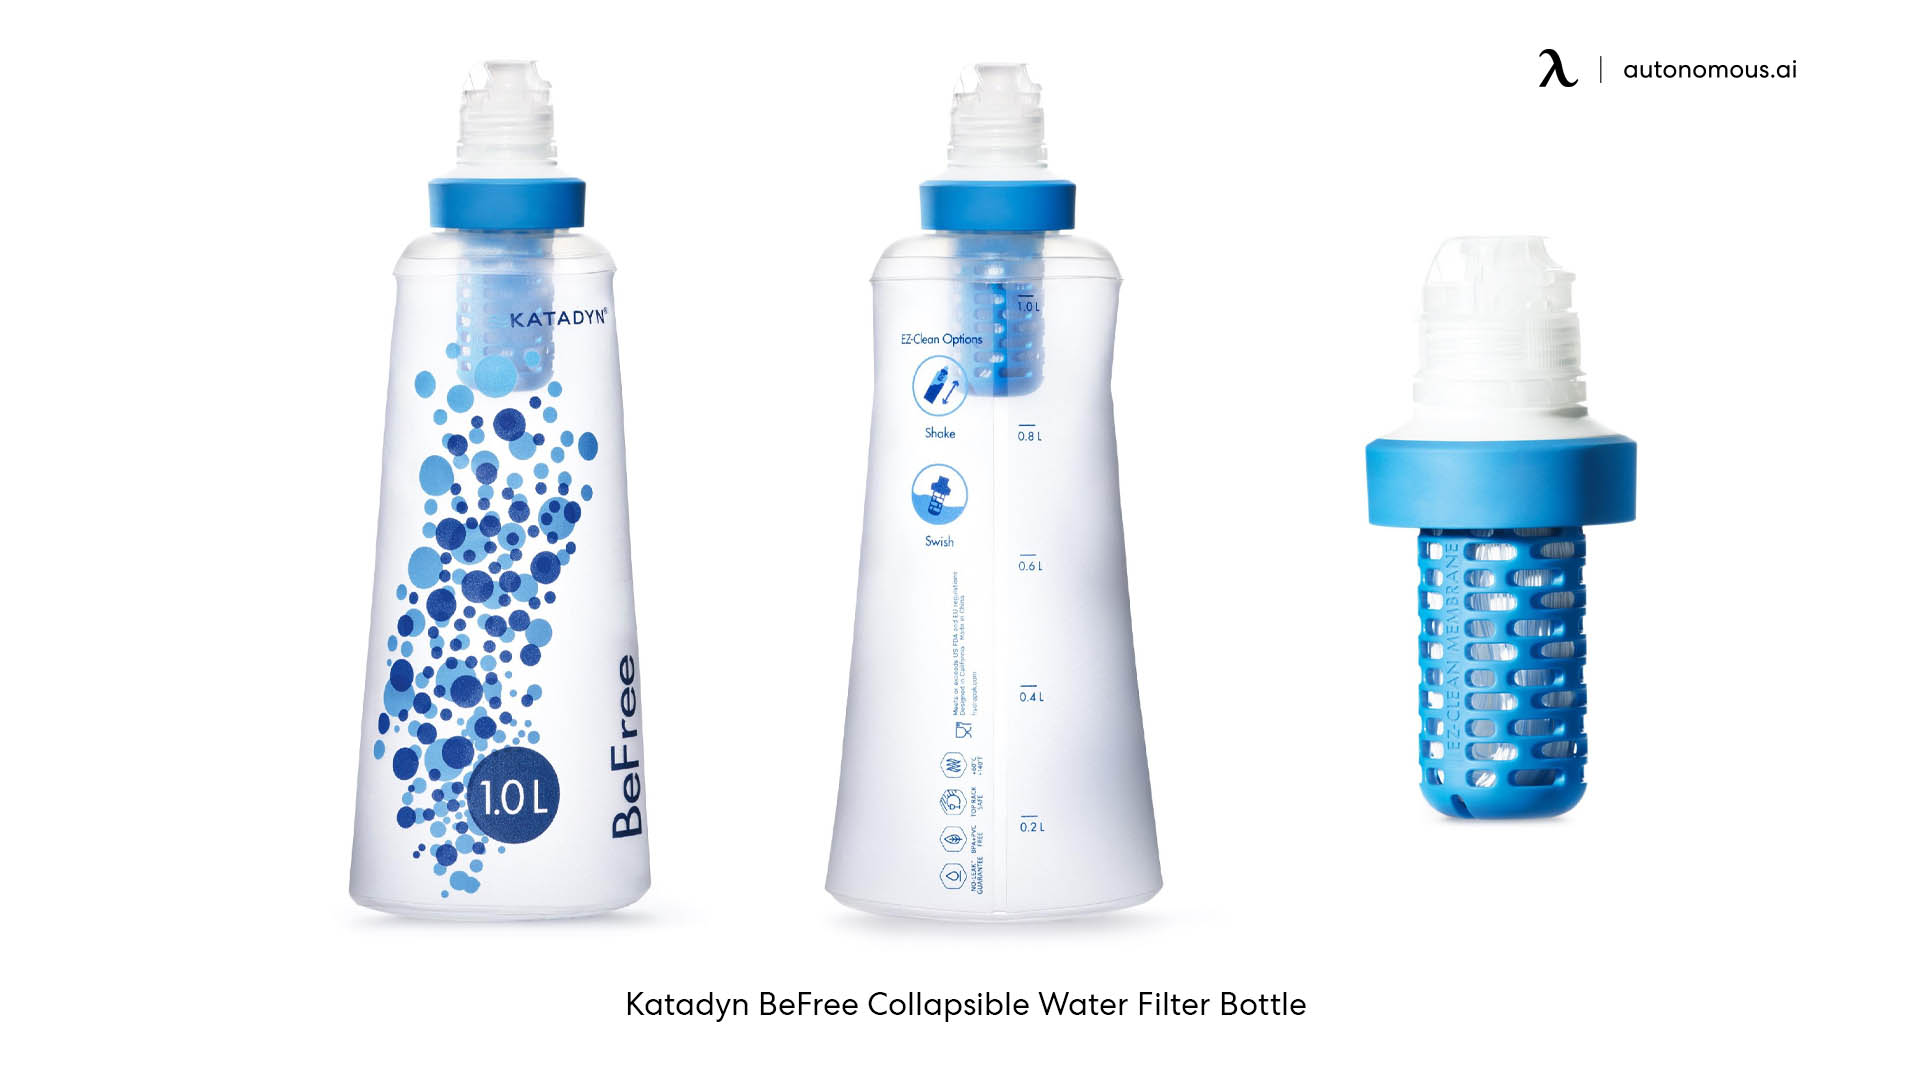 Katadyn BeFree Collapsible filtered water bottle